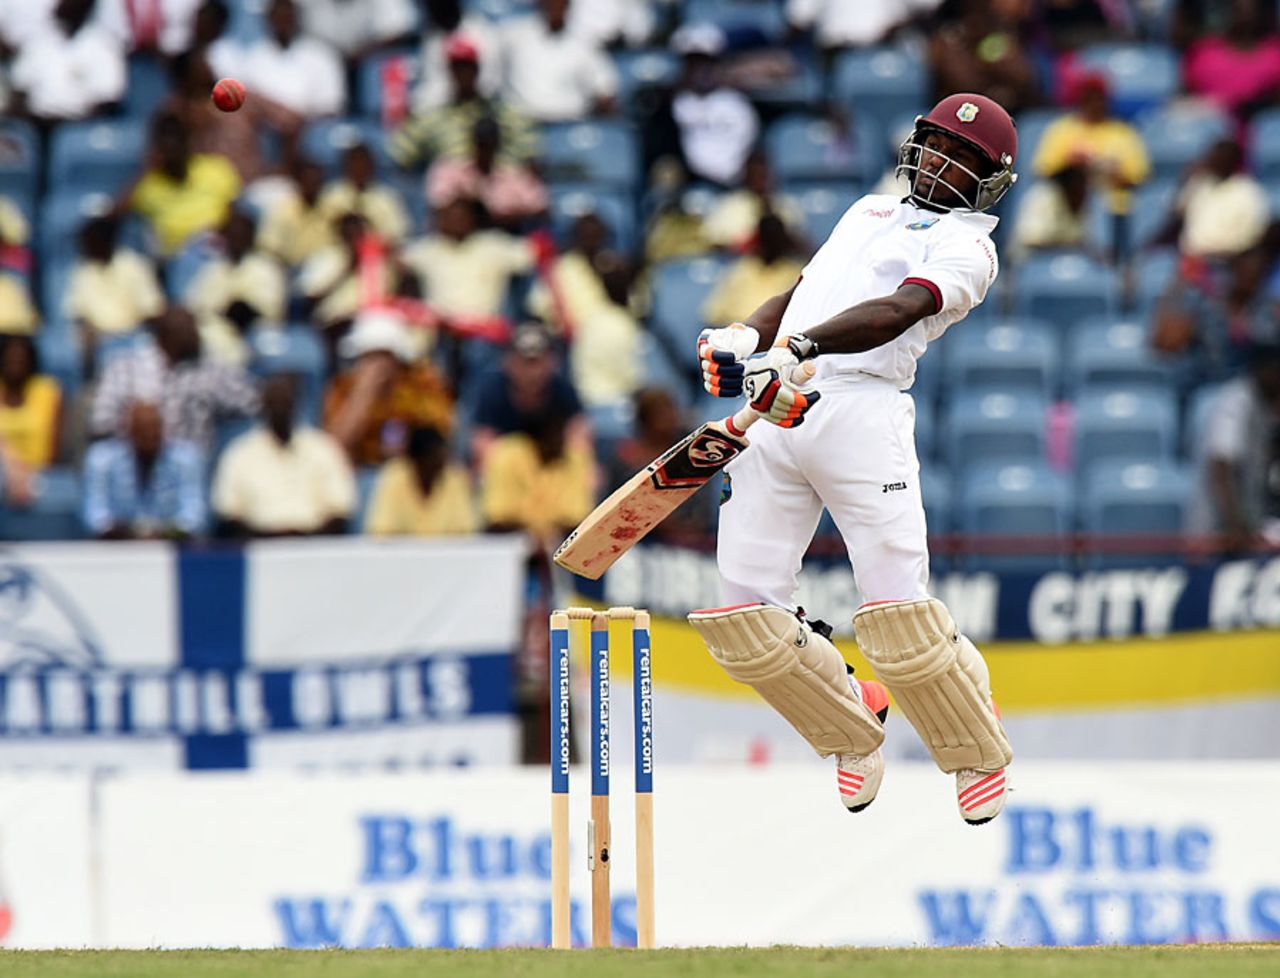 Jermaine Blackwood sways away from a short ball, West Indies v England, 2nd Test, St George's, 1st day, April 21, 2015